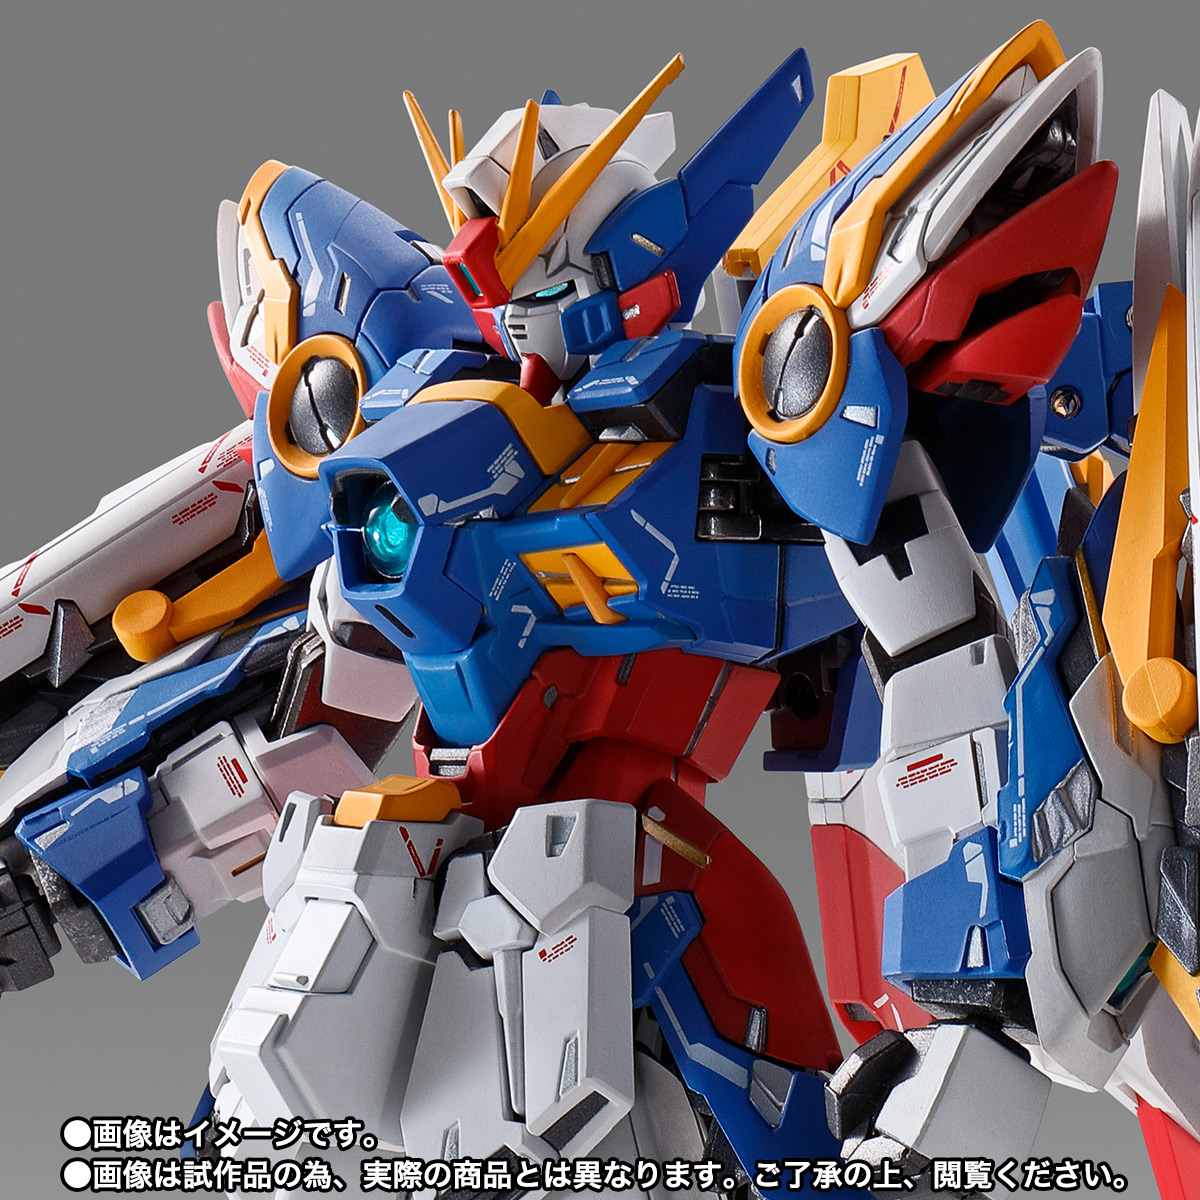 FIX FIGURATION METAL COMPOSITE ウイングガンダム コミック/アニメ フィギュア おもちゃ・ホビー・グッズ 取り扱い 店舗